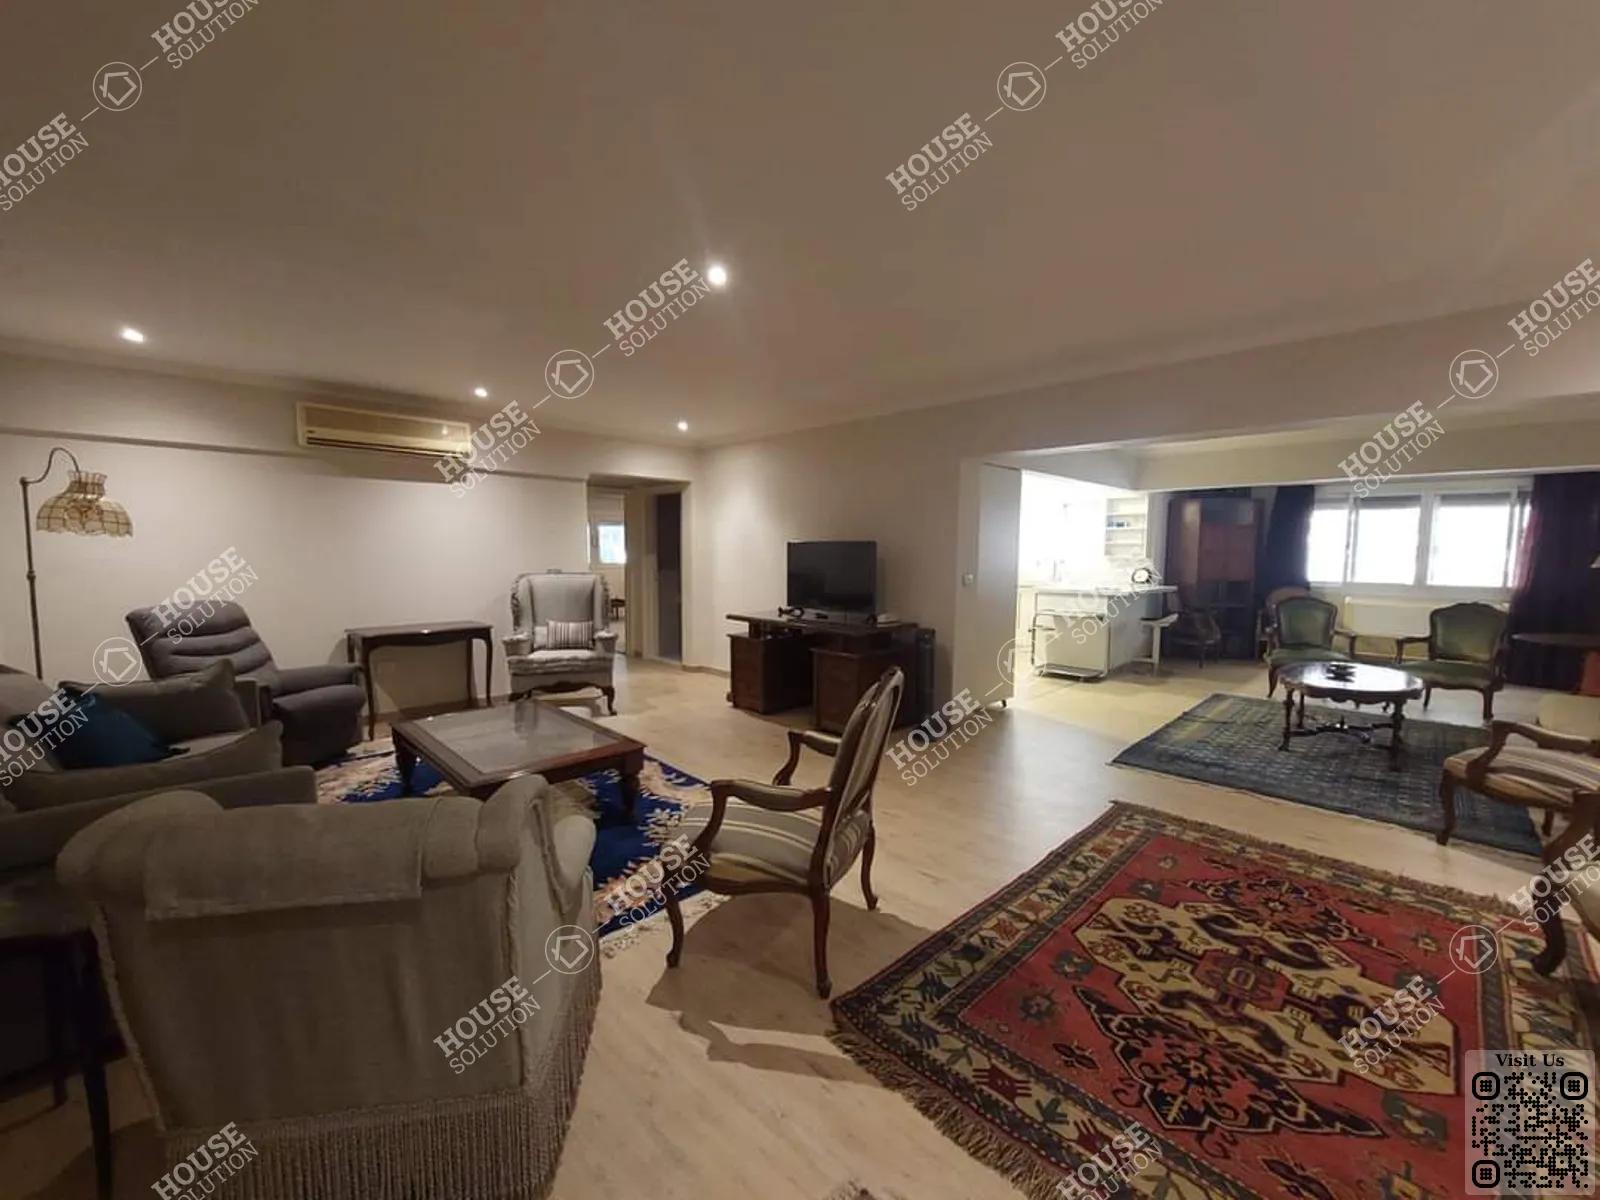 RECEPTION  @ Apartments For Rent In Maadi Maadi Degla Area: 145 m² consists of 2 Bedrooms 2 Bathrooms Furnished 5 stars #5910-0